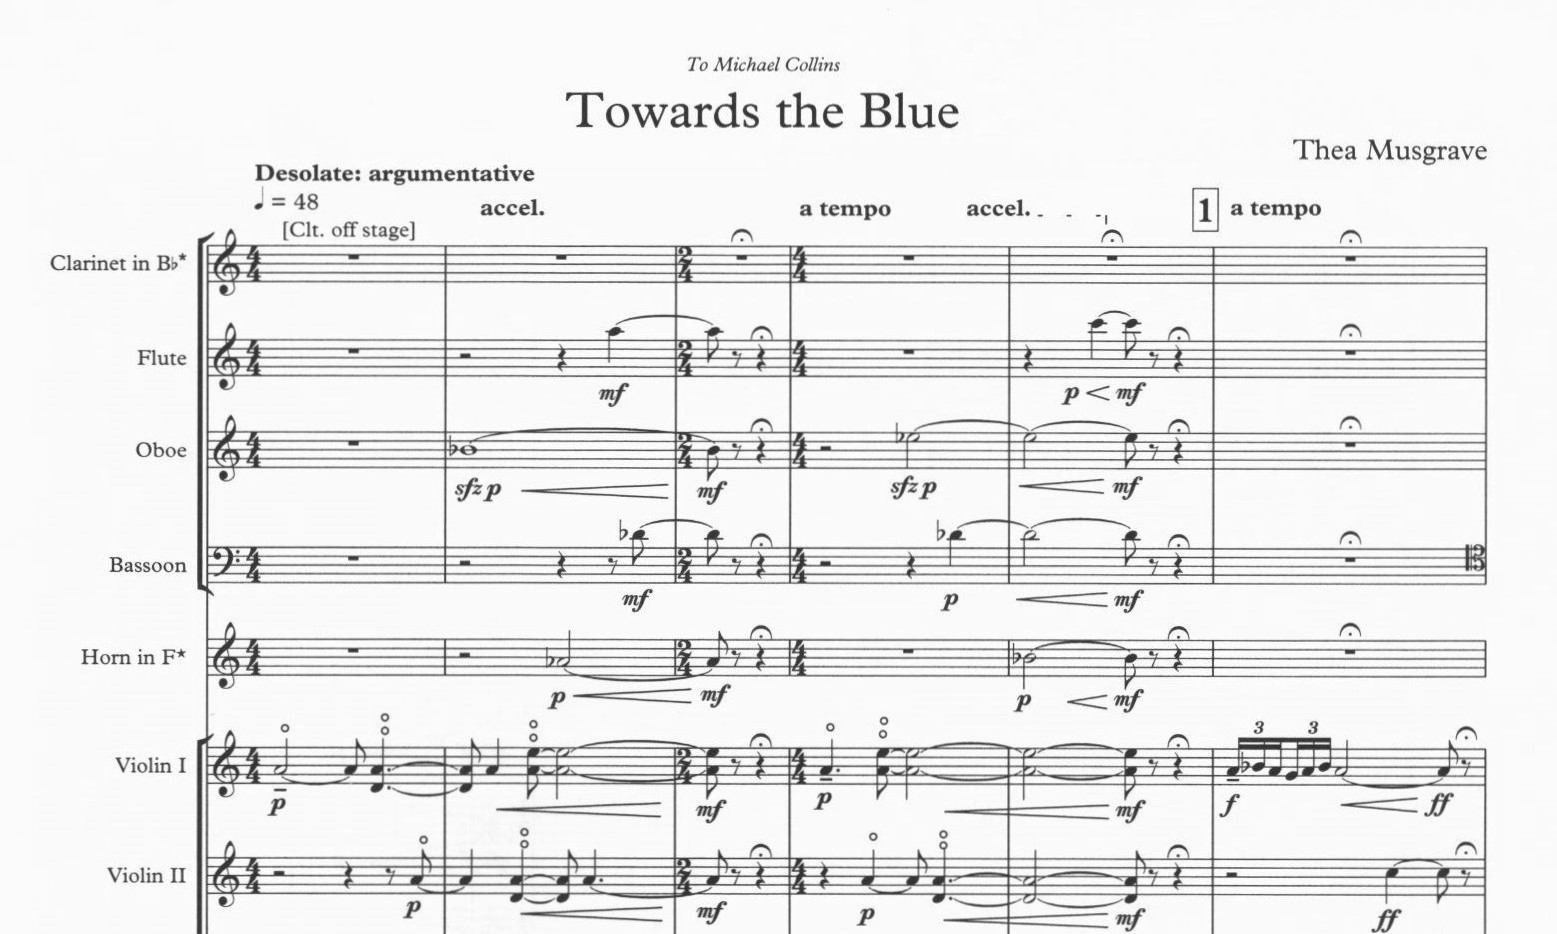 Towards the Blue - Thea Musgrave